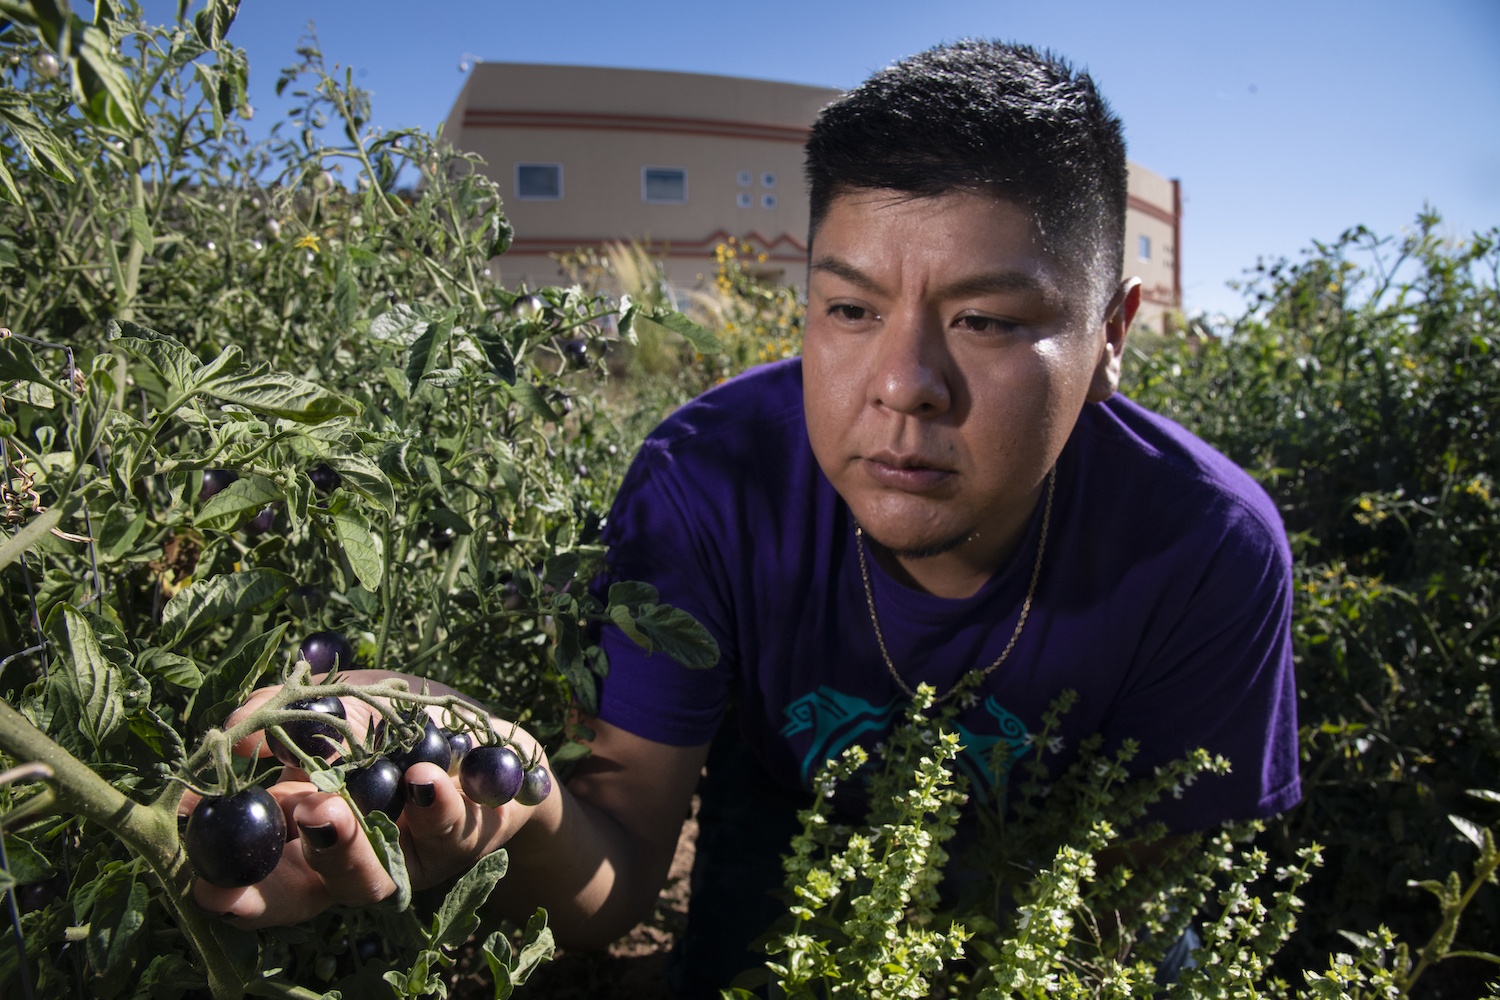 While white co-founders shill their food startup ideas in the pages of glossy magazines, Native producers and entrepreneurs struggle to attract basic press interest and investment. Left, Institute of American Indian Arts (IAIA) research assistant Kyle Kootswaytewa checks on the health of black tomatoes in the IAIA Demonstration Garden, in Santa Fe, NM, on Sept. 11, 2019.